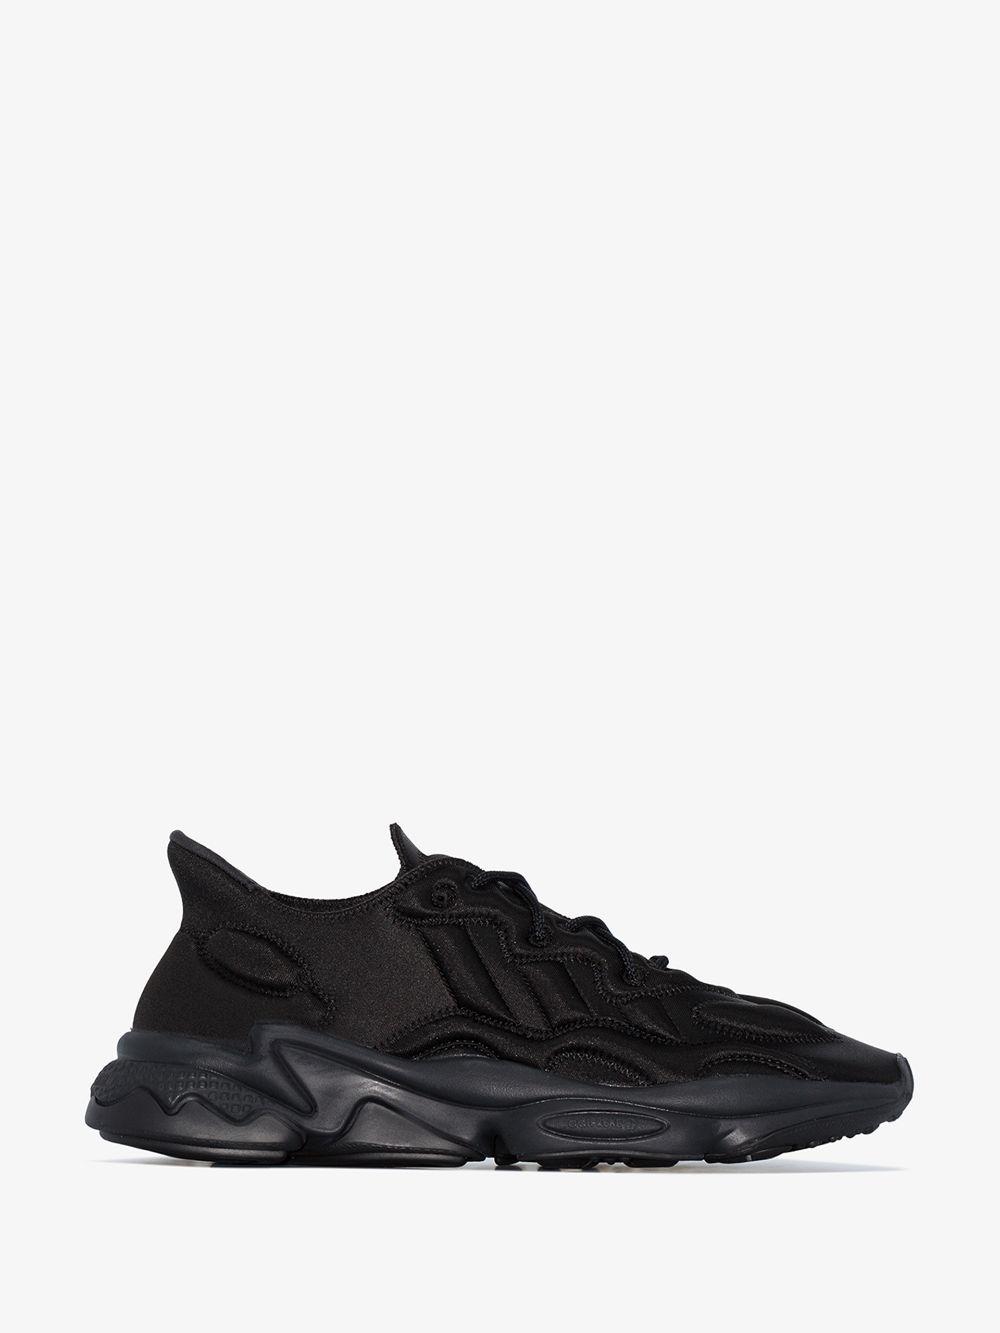 adidas Synthetic Ozweego 3d Lunar Mission Sneakers in Black | Lyst